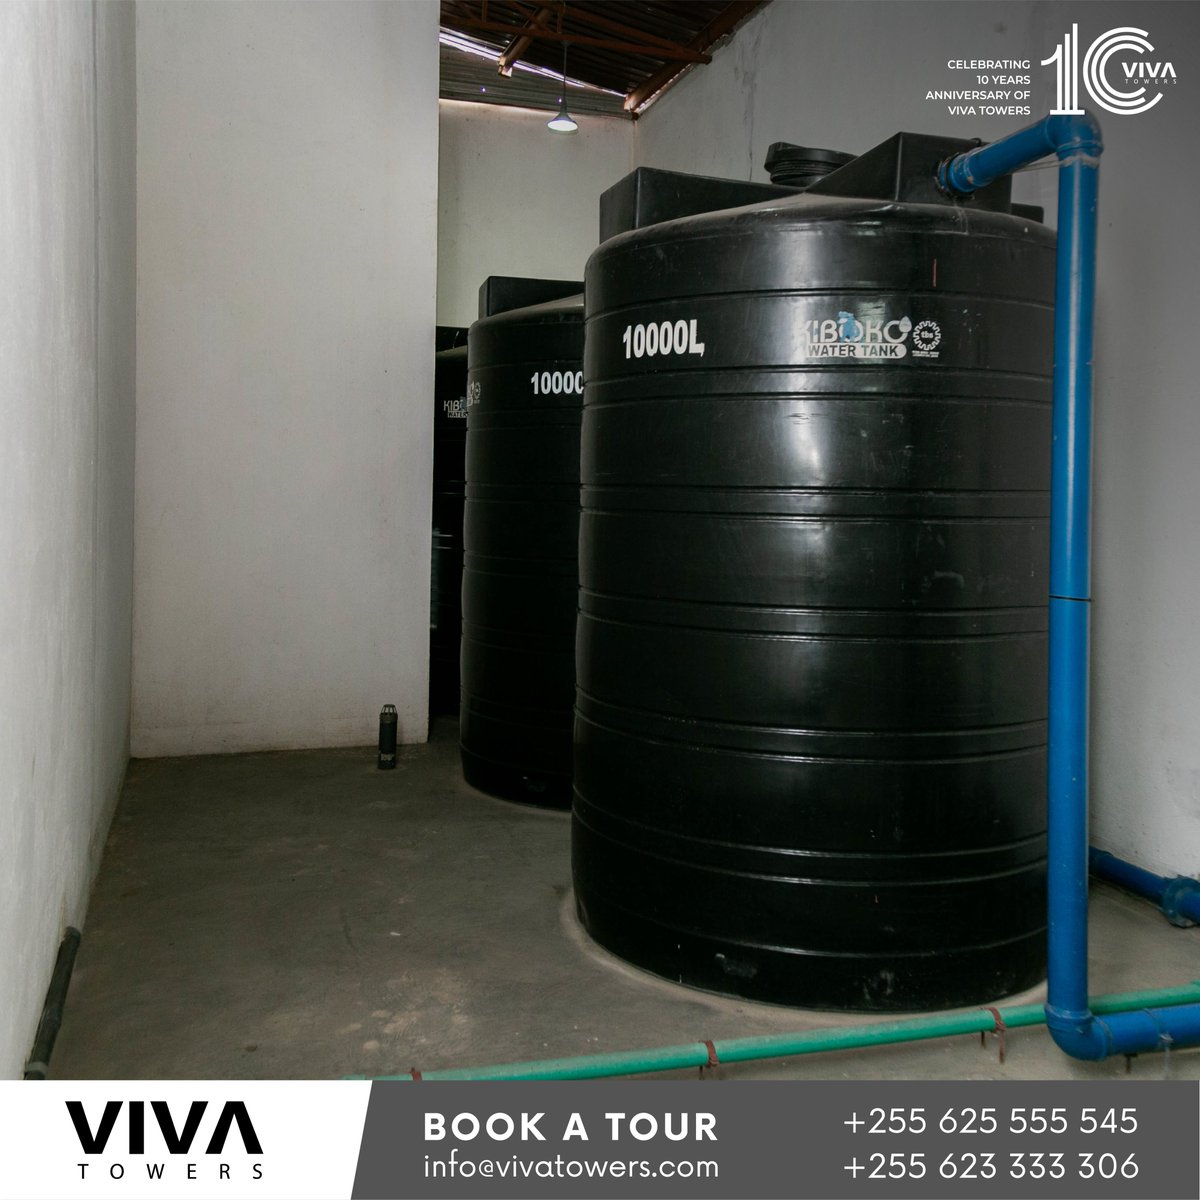 Water conservation at its best: our apartments feature strategic storage systems.
 #vivatowers #vivatowers10years #10yearsanniversary #building #property #Apartment #daressalaam #shopspaces #landmark #apartments #luxuryapartments #officespace #security #commercial #residential